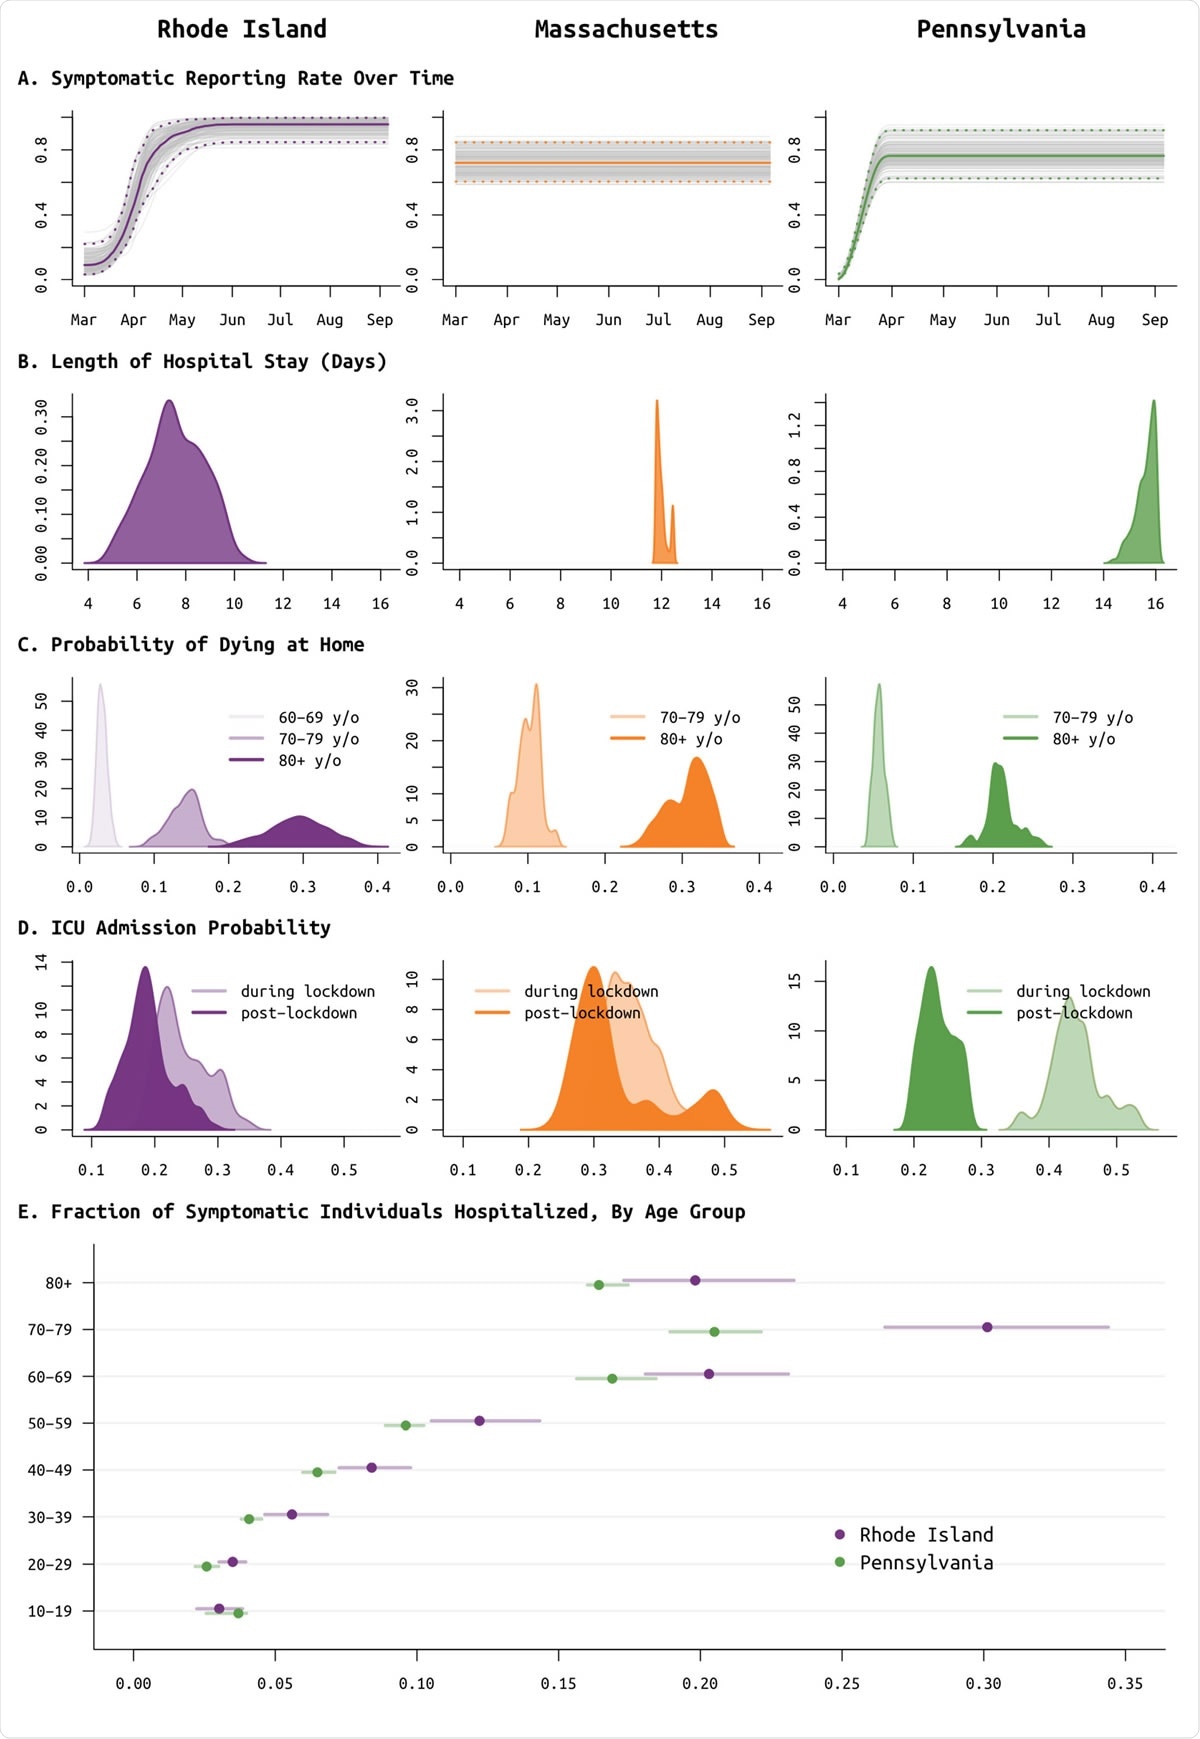 Posterior distributions of reporting rate (panel A) and clinical parameters (panels B to E) for Rhode Island (purple, left column), Massachusetts (orange, middle column), and Pennsylvania (green, right column). (A) Reporting parameter ρ, i.e. the fraction of symptomatic SARS-CoV-2 cases that are reported to the health system, plotted as a function of time. In Rhode Island, it was known that in March testing was not available and cases could not be confirmed; therefore a spline function was fit for ρ. This same function provided a better fit for Pennsylvania data, but not for Massachusetts data. (B) Median length of medicalfloor hospital stay was 7.5 days in RI, 11.9 days in MA, and 15.7 days in PA. This parameter was constrained to be between 11.8 and 12.8 days in MA, as without this constraint identifiability issues arose due to the lack of the ‘cumulative hospitalizations’ data stream. (C) Probabilities of dying at home for the 60-69, 70-79, and 80+ age groups; 60-69 age group was included only for RI as data were insufficient in PA and MA. These are largely reflective of the epidemics passing through nursing home populations where individuals are not counted as hospitalized if they remain in care at their congregate care facility in a severe or advanced clinical state. These probabilities are important when accounting for hospital bed capacity in forecasts. (D) Age-adjusted ICU admission probability during the lockdown period in spring 2020 (lighter color) and after the lockdown (darker color). (E) Probability of hospitalization (median and 95% CIs) for symptomatic SARS-CoV-2 infections, by age group; MA estimates are excluded as these had priors set based on estimates in RI.